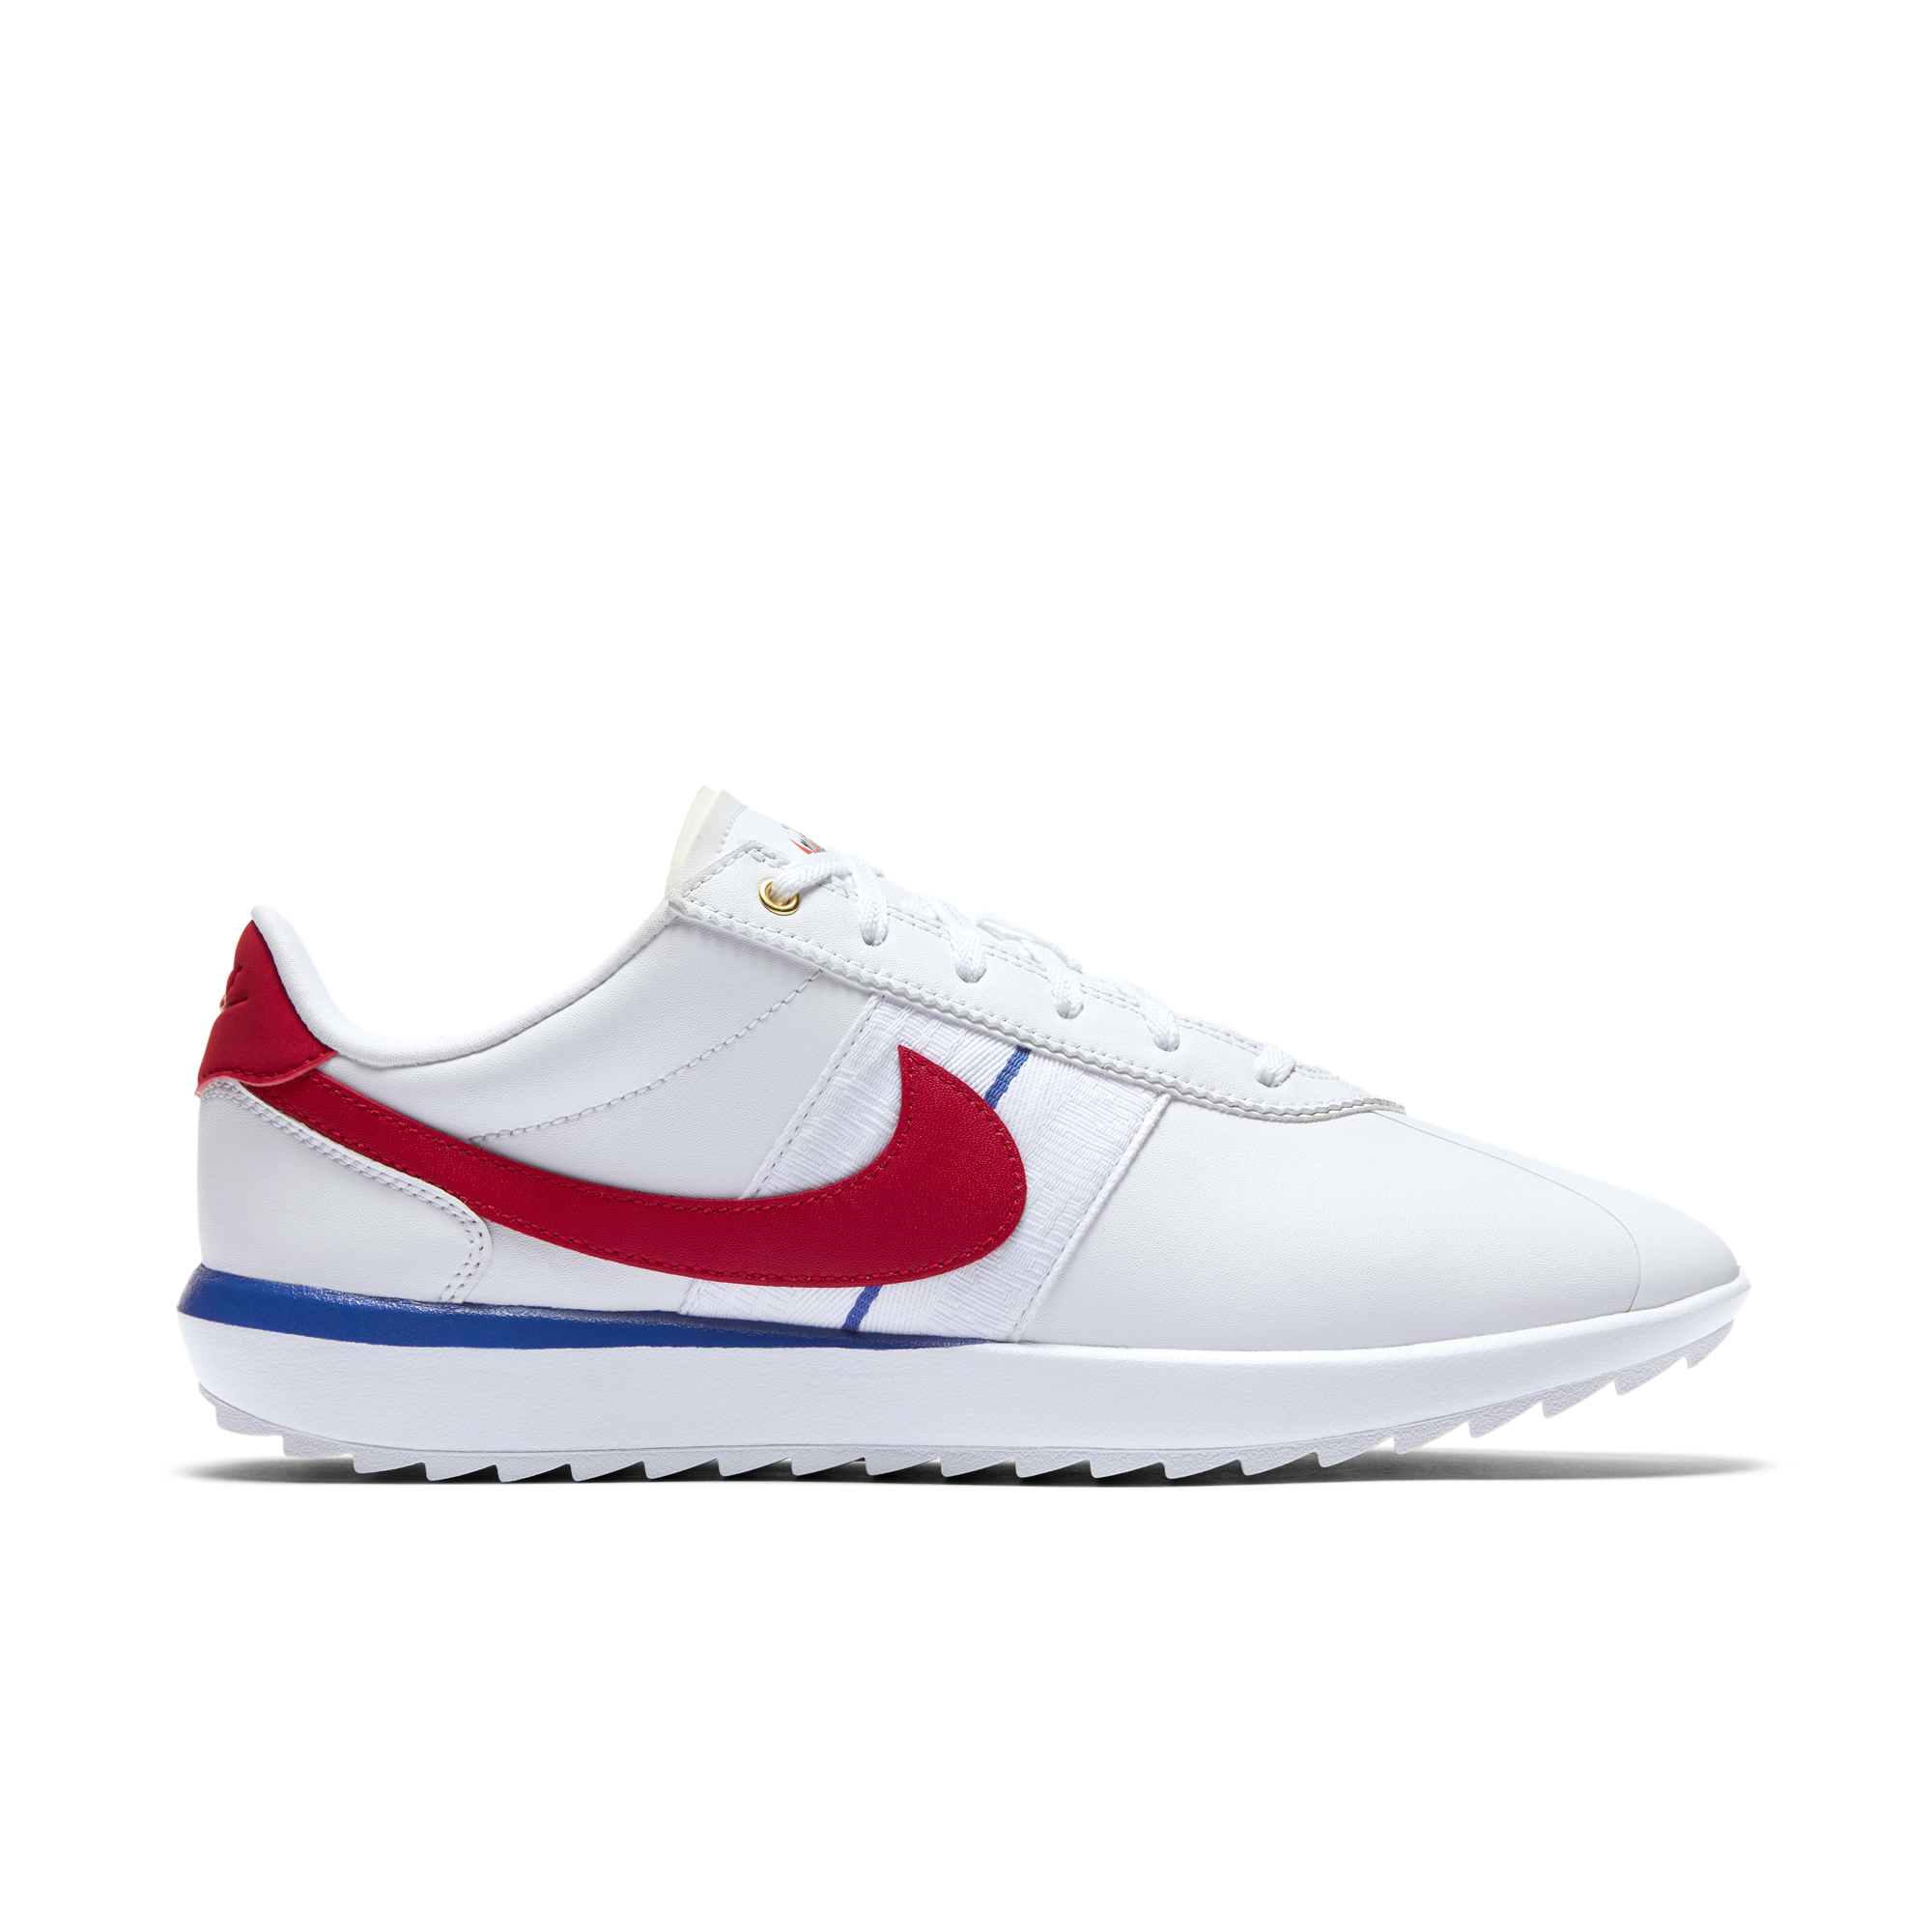 red nike cortez womens